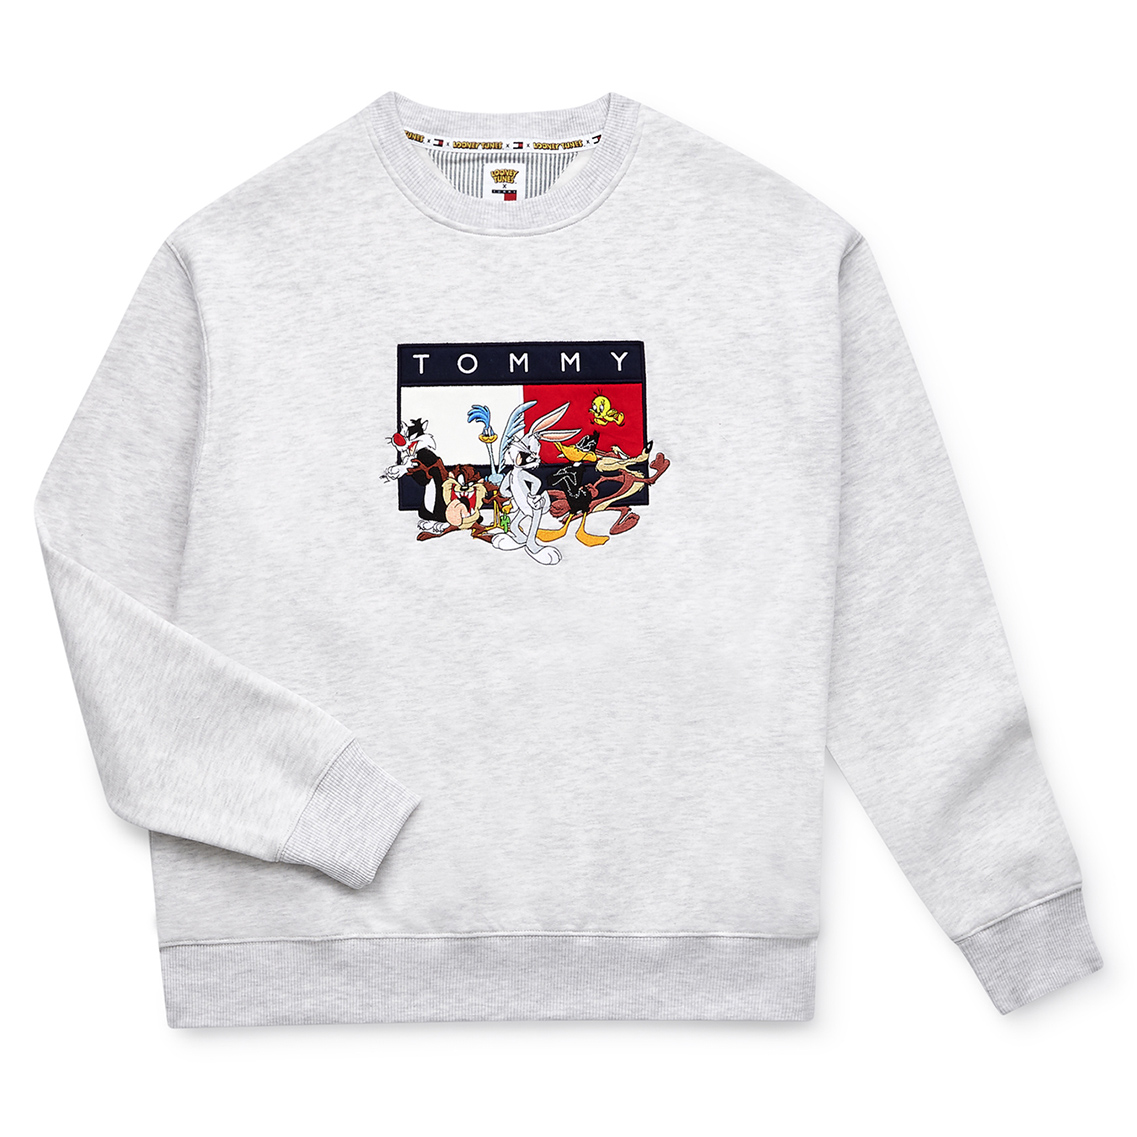 TOMMY JEANSXLOONEY TUNES | Tommy Hilfiger - トミー ヒルフィガー 